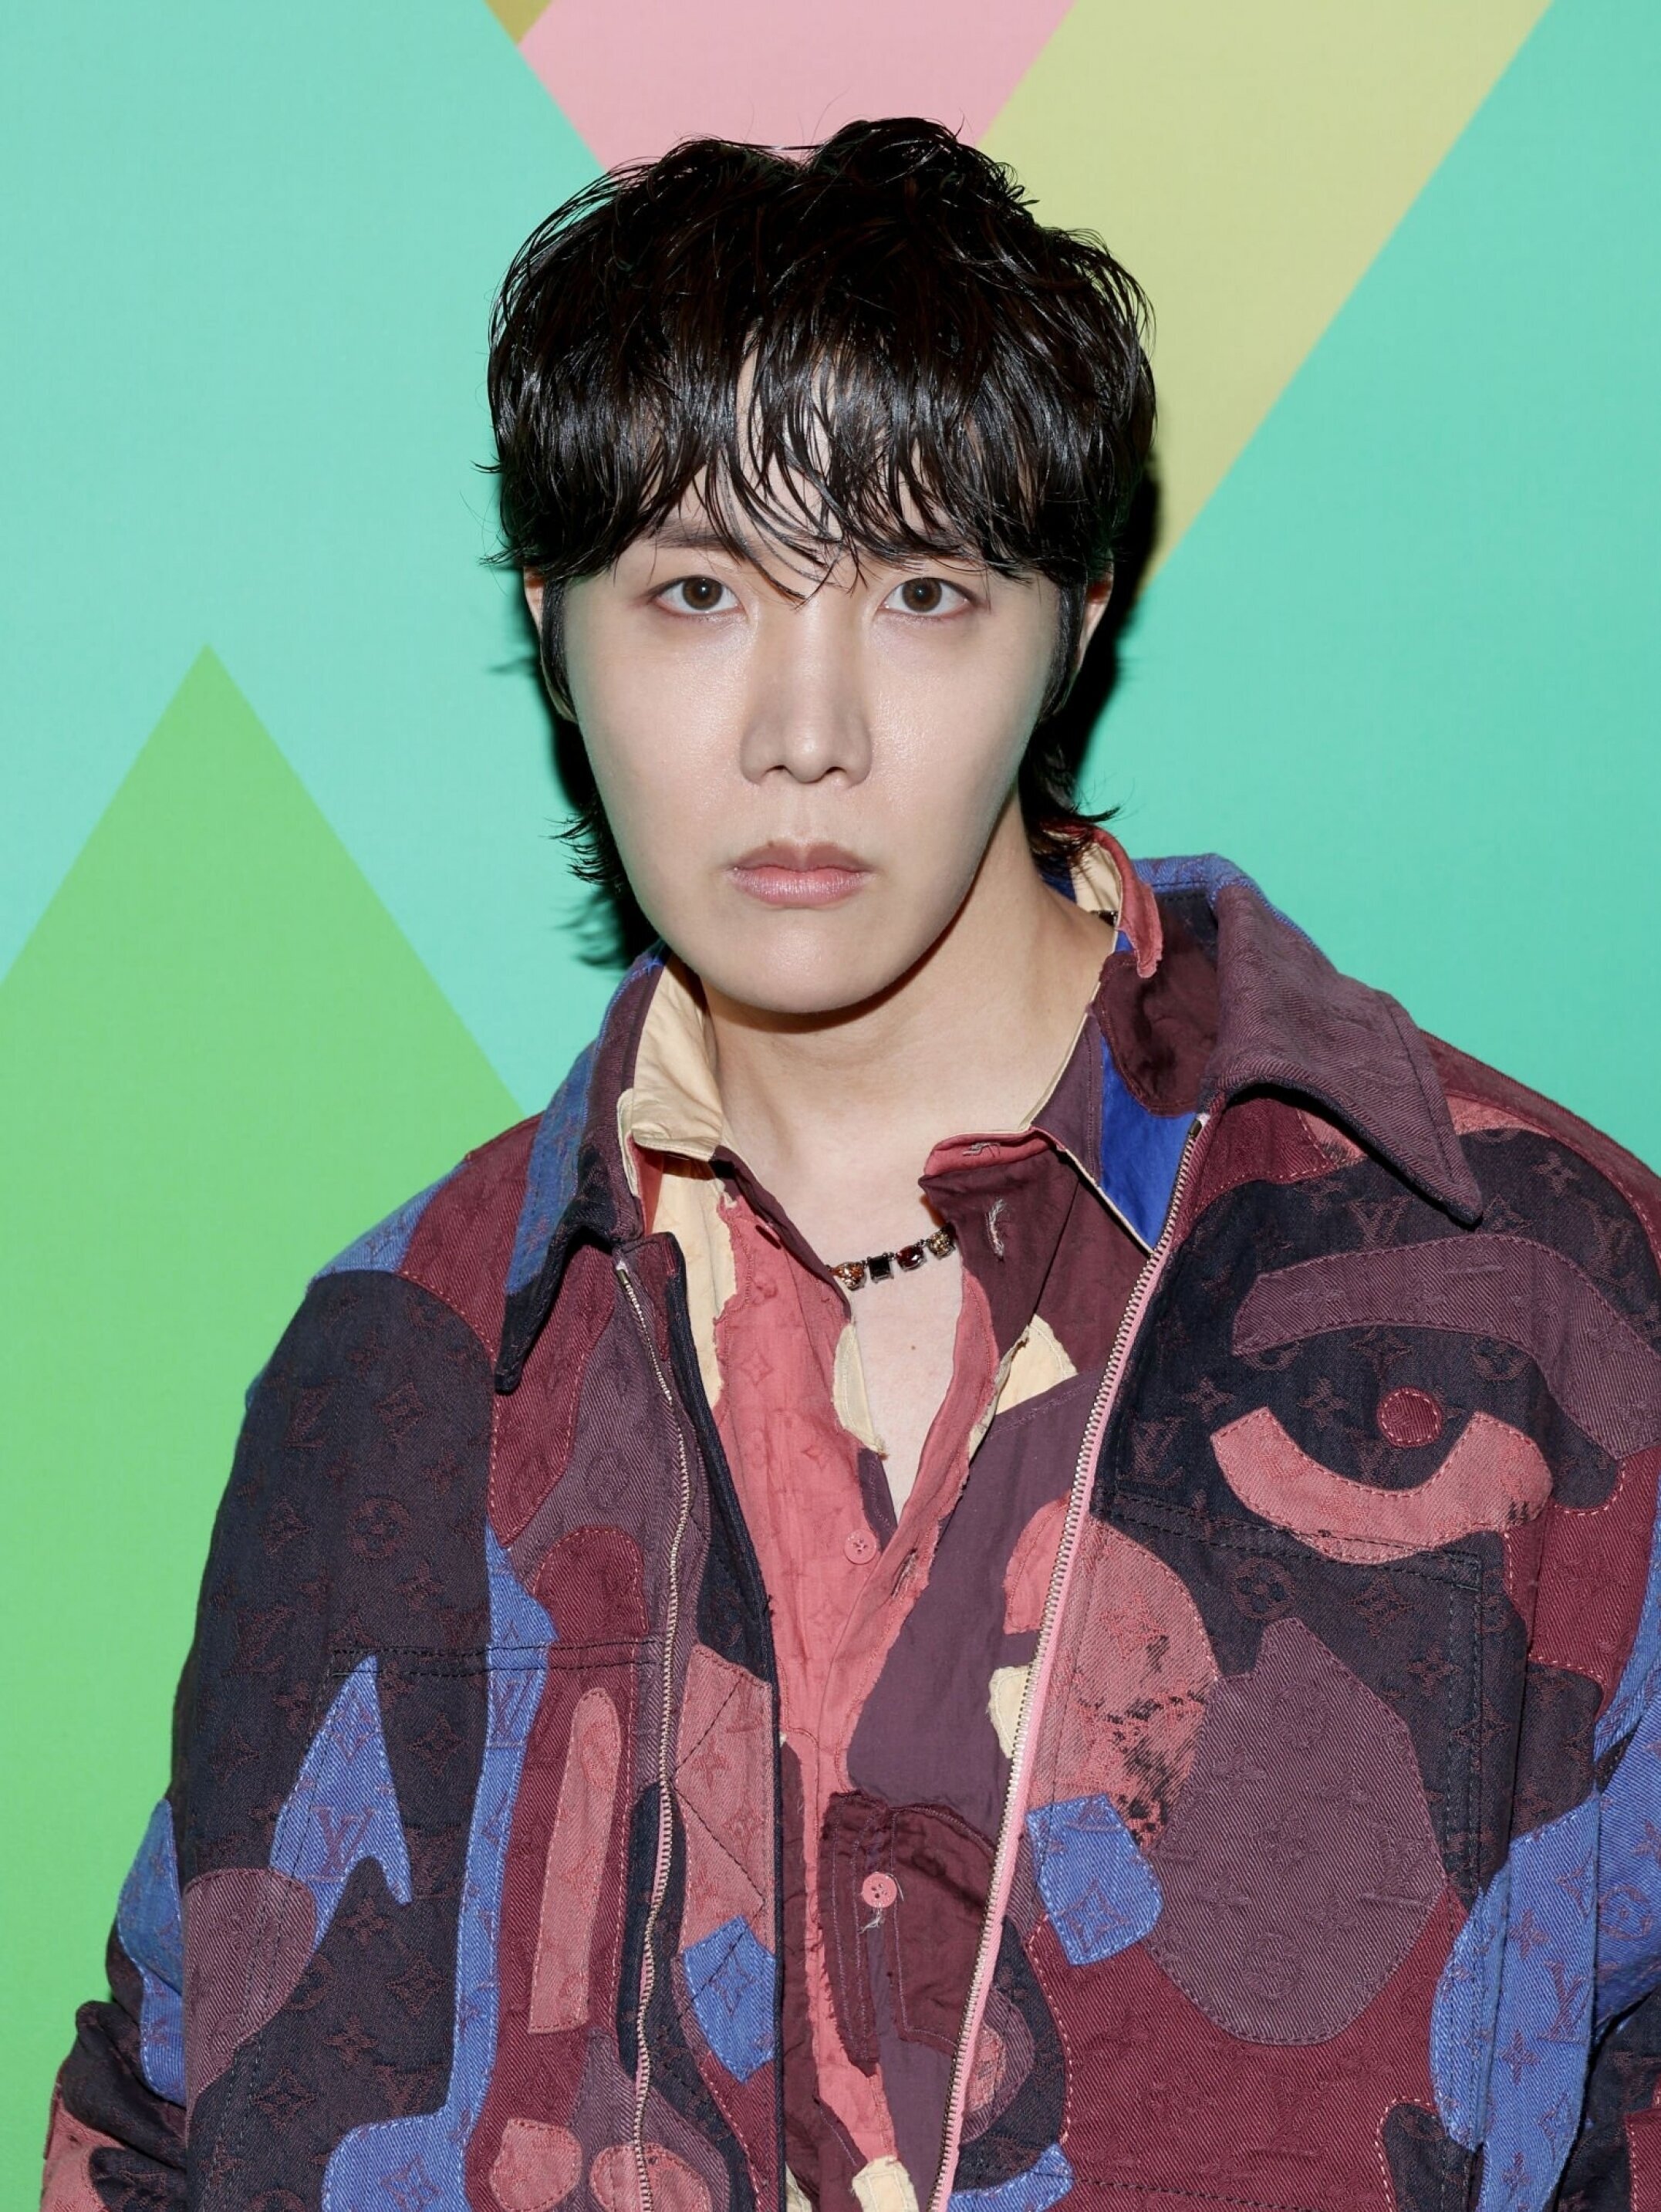 Watch J-Hope sparkle and shine in Louis Vuitton's new Men's Fall-Winter 23  campaign, BTS' ARMY loves new pics and video